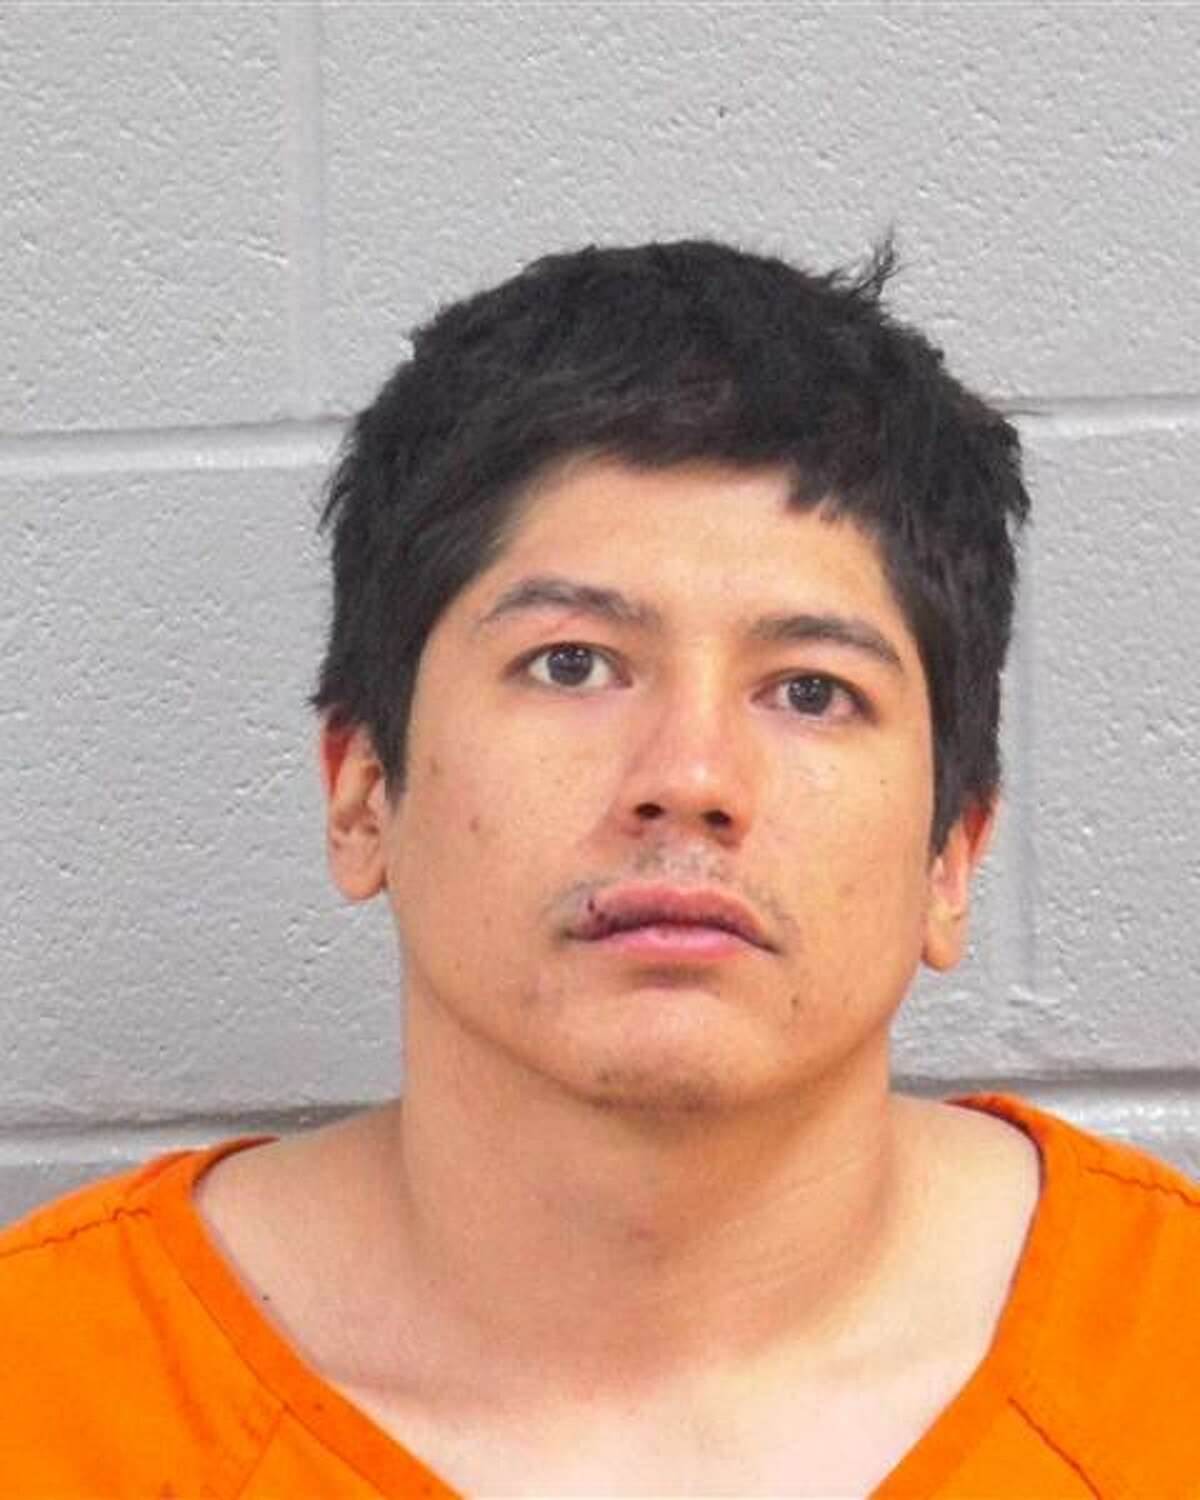  Jaime Humberto Garcia, 26, was charged with two counts of assault of a peace officer/judge, a second-degree felony and evading arrest detention, a Class A misdemeanor.